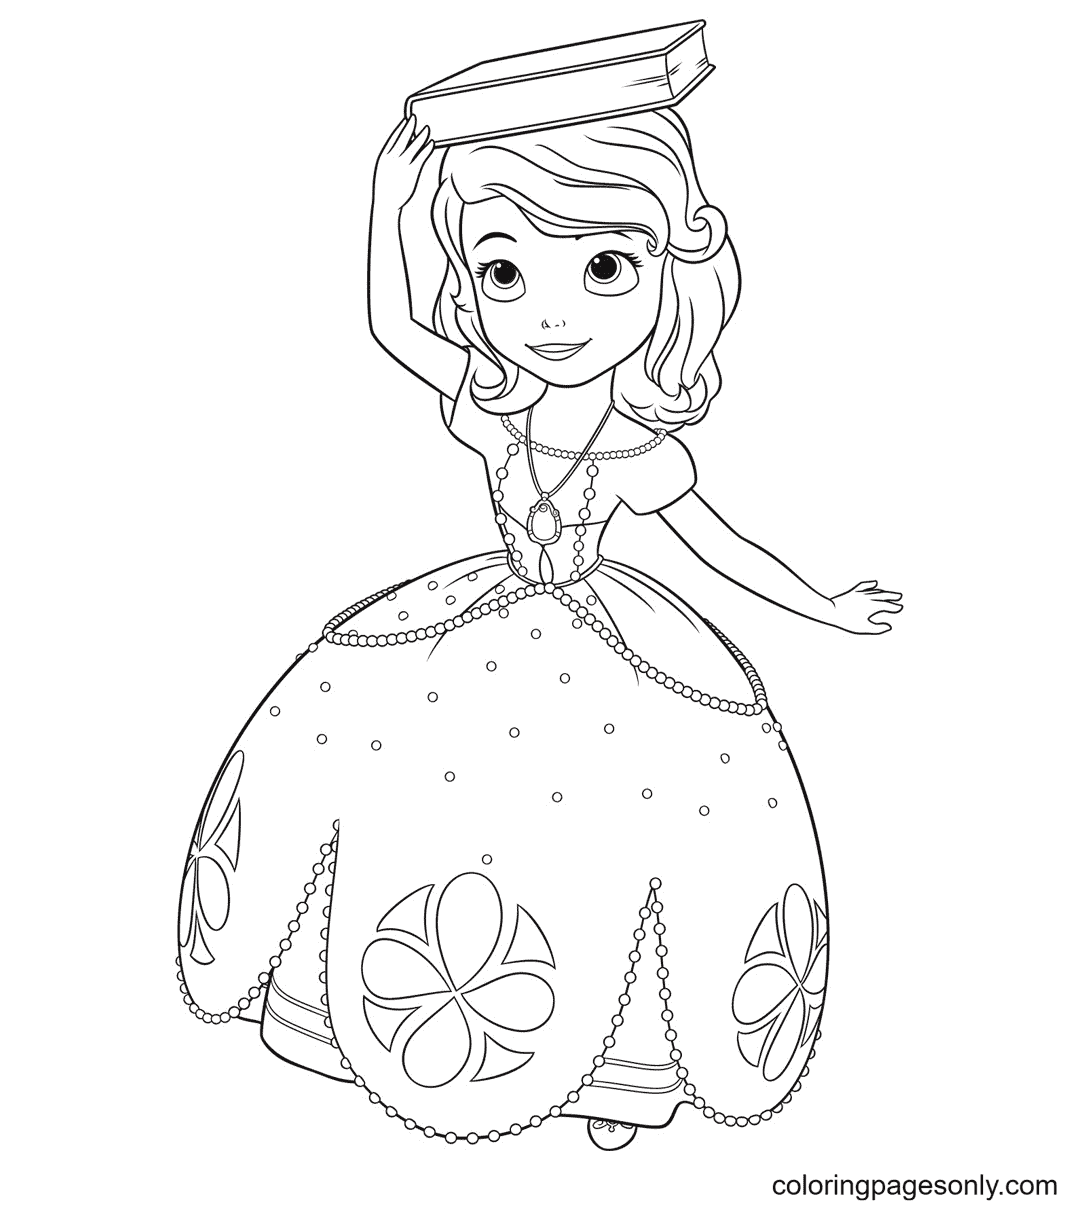 Princess Sofia with a Book on Her Head Coloring Page